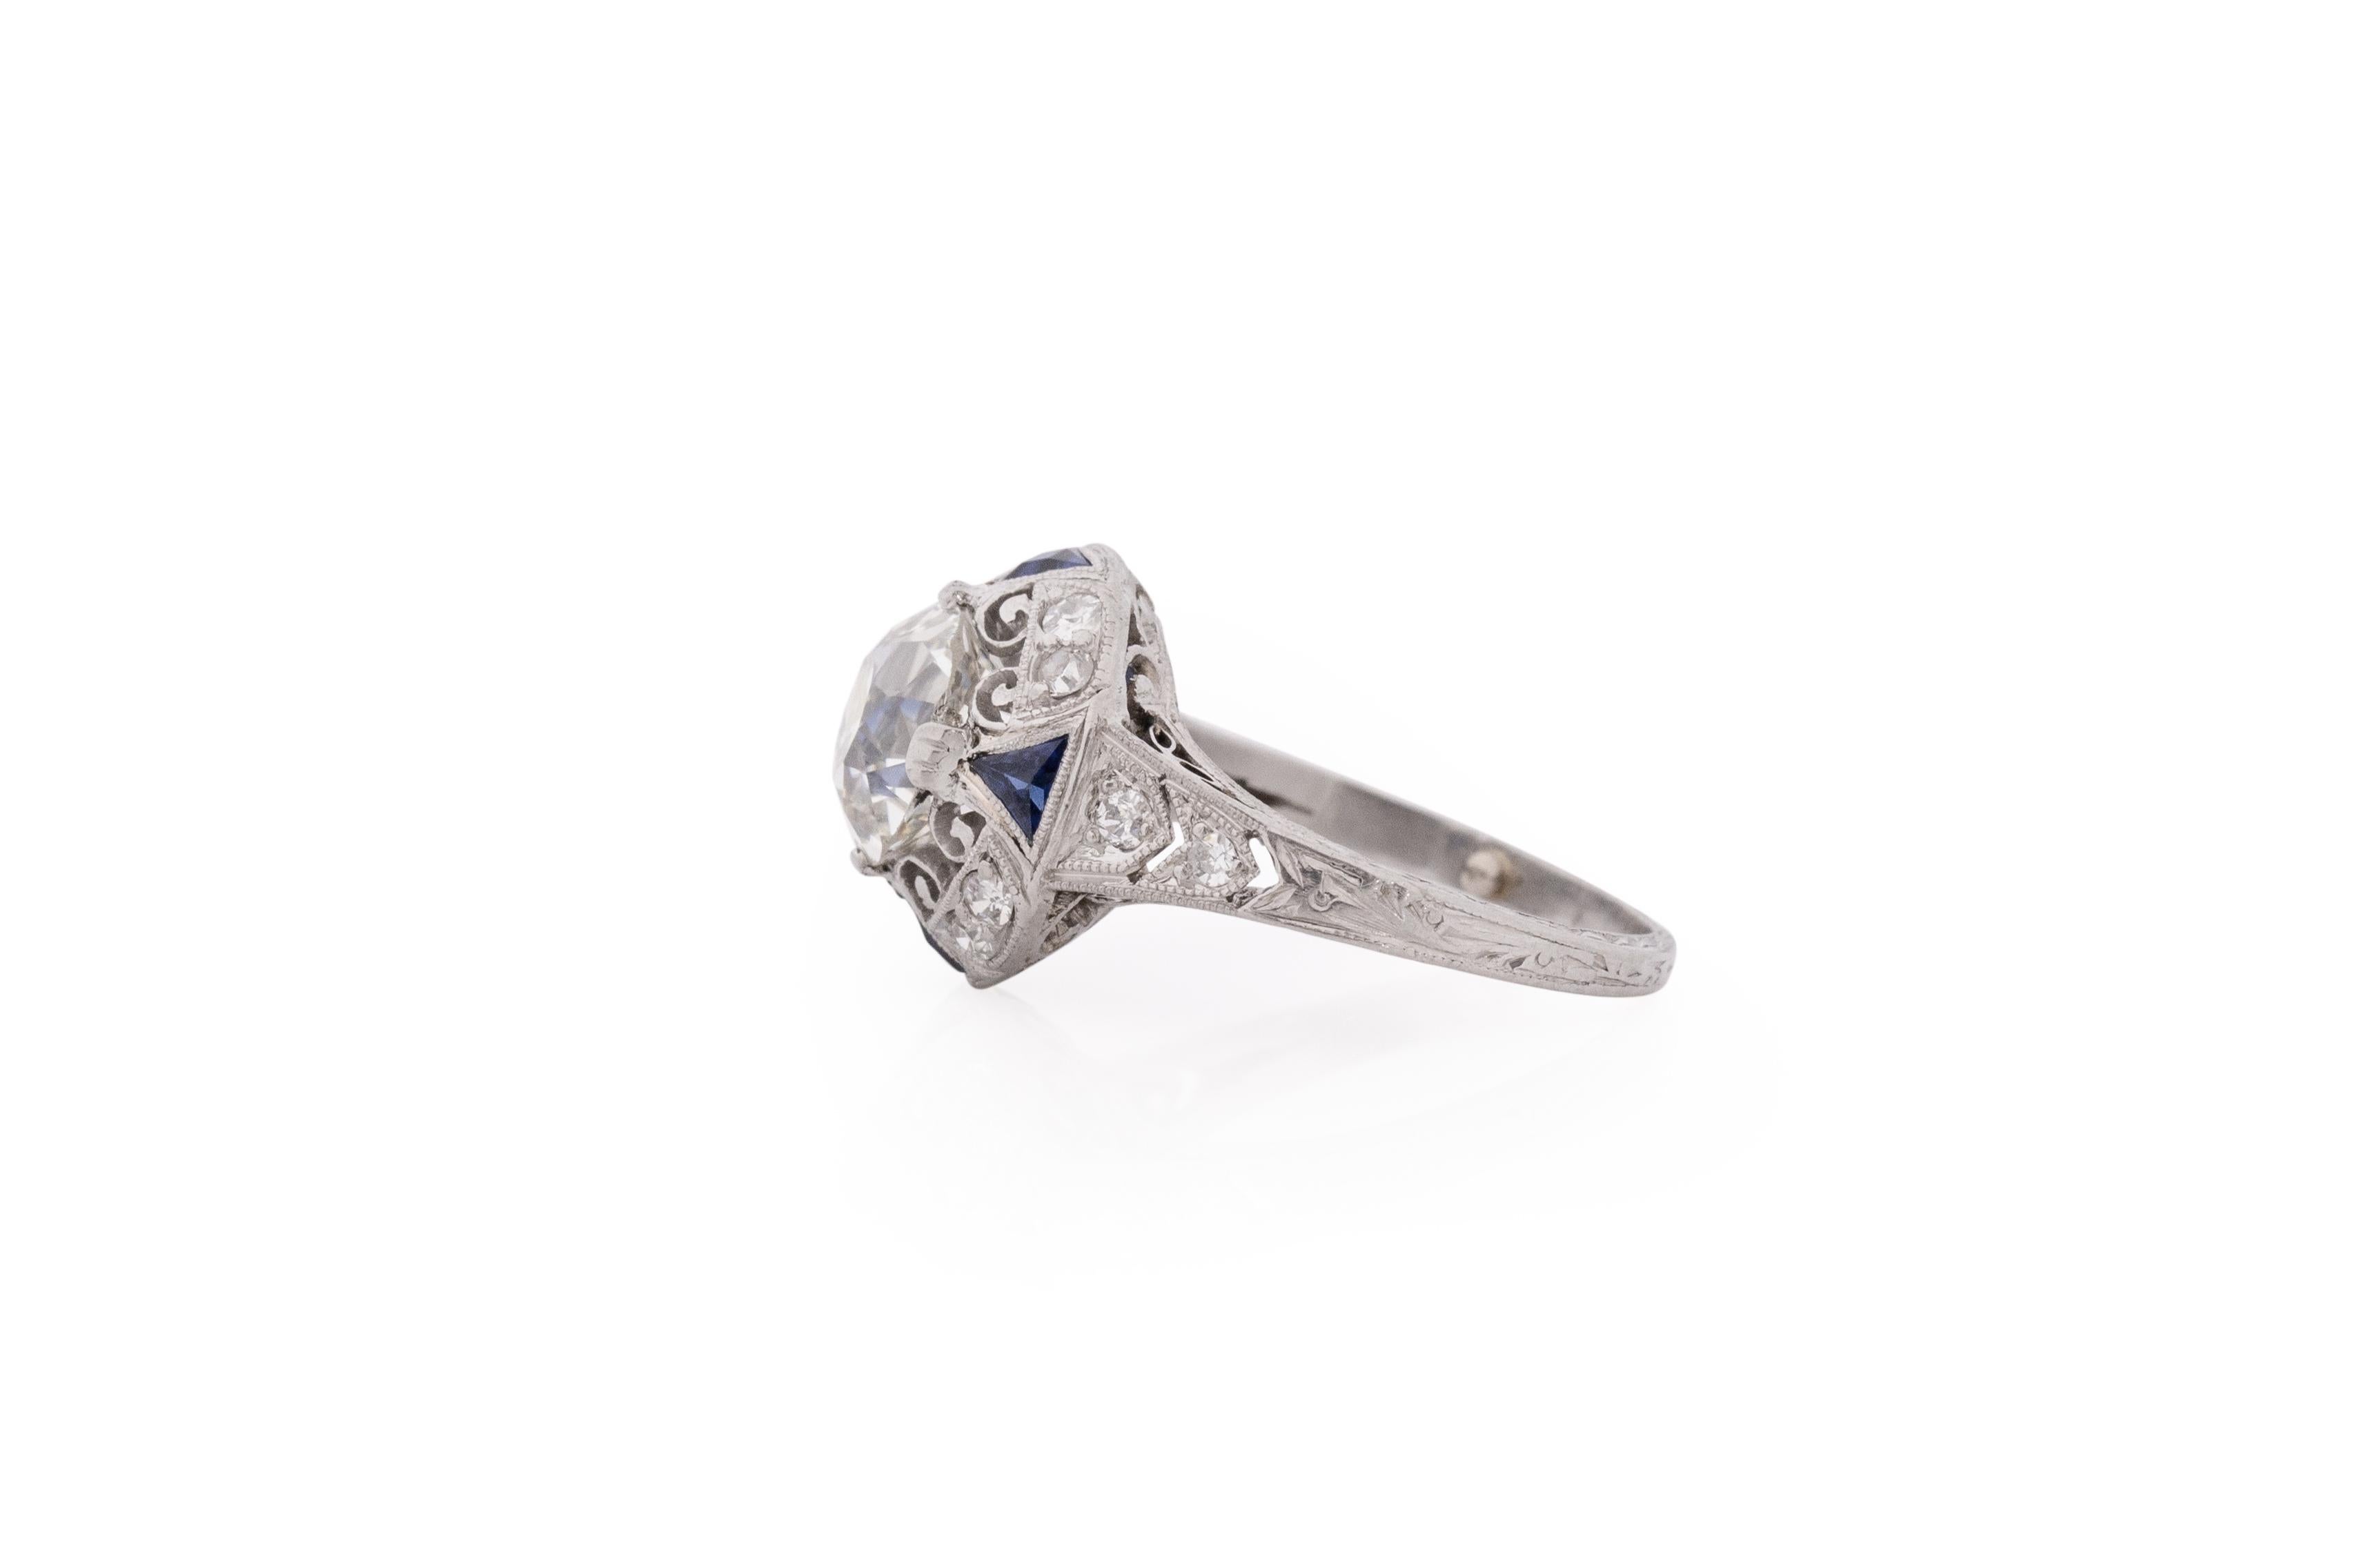 Item Details: 
Ring Size: 5
Metal Type: Platinum [Hallmarked, and Tested]
Weight: 3.5 grams

Center Diamond Details:
GIA REPORT #: 6213485989
Weight: 1.99 carat
Cut: Antique Cushion (Old Mine Brilliant)
Color: K
Clarity: VS1
Measurements: 7.40mm x